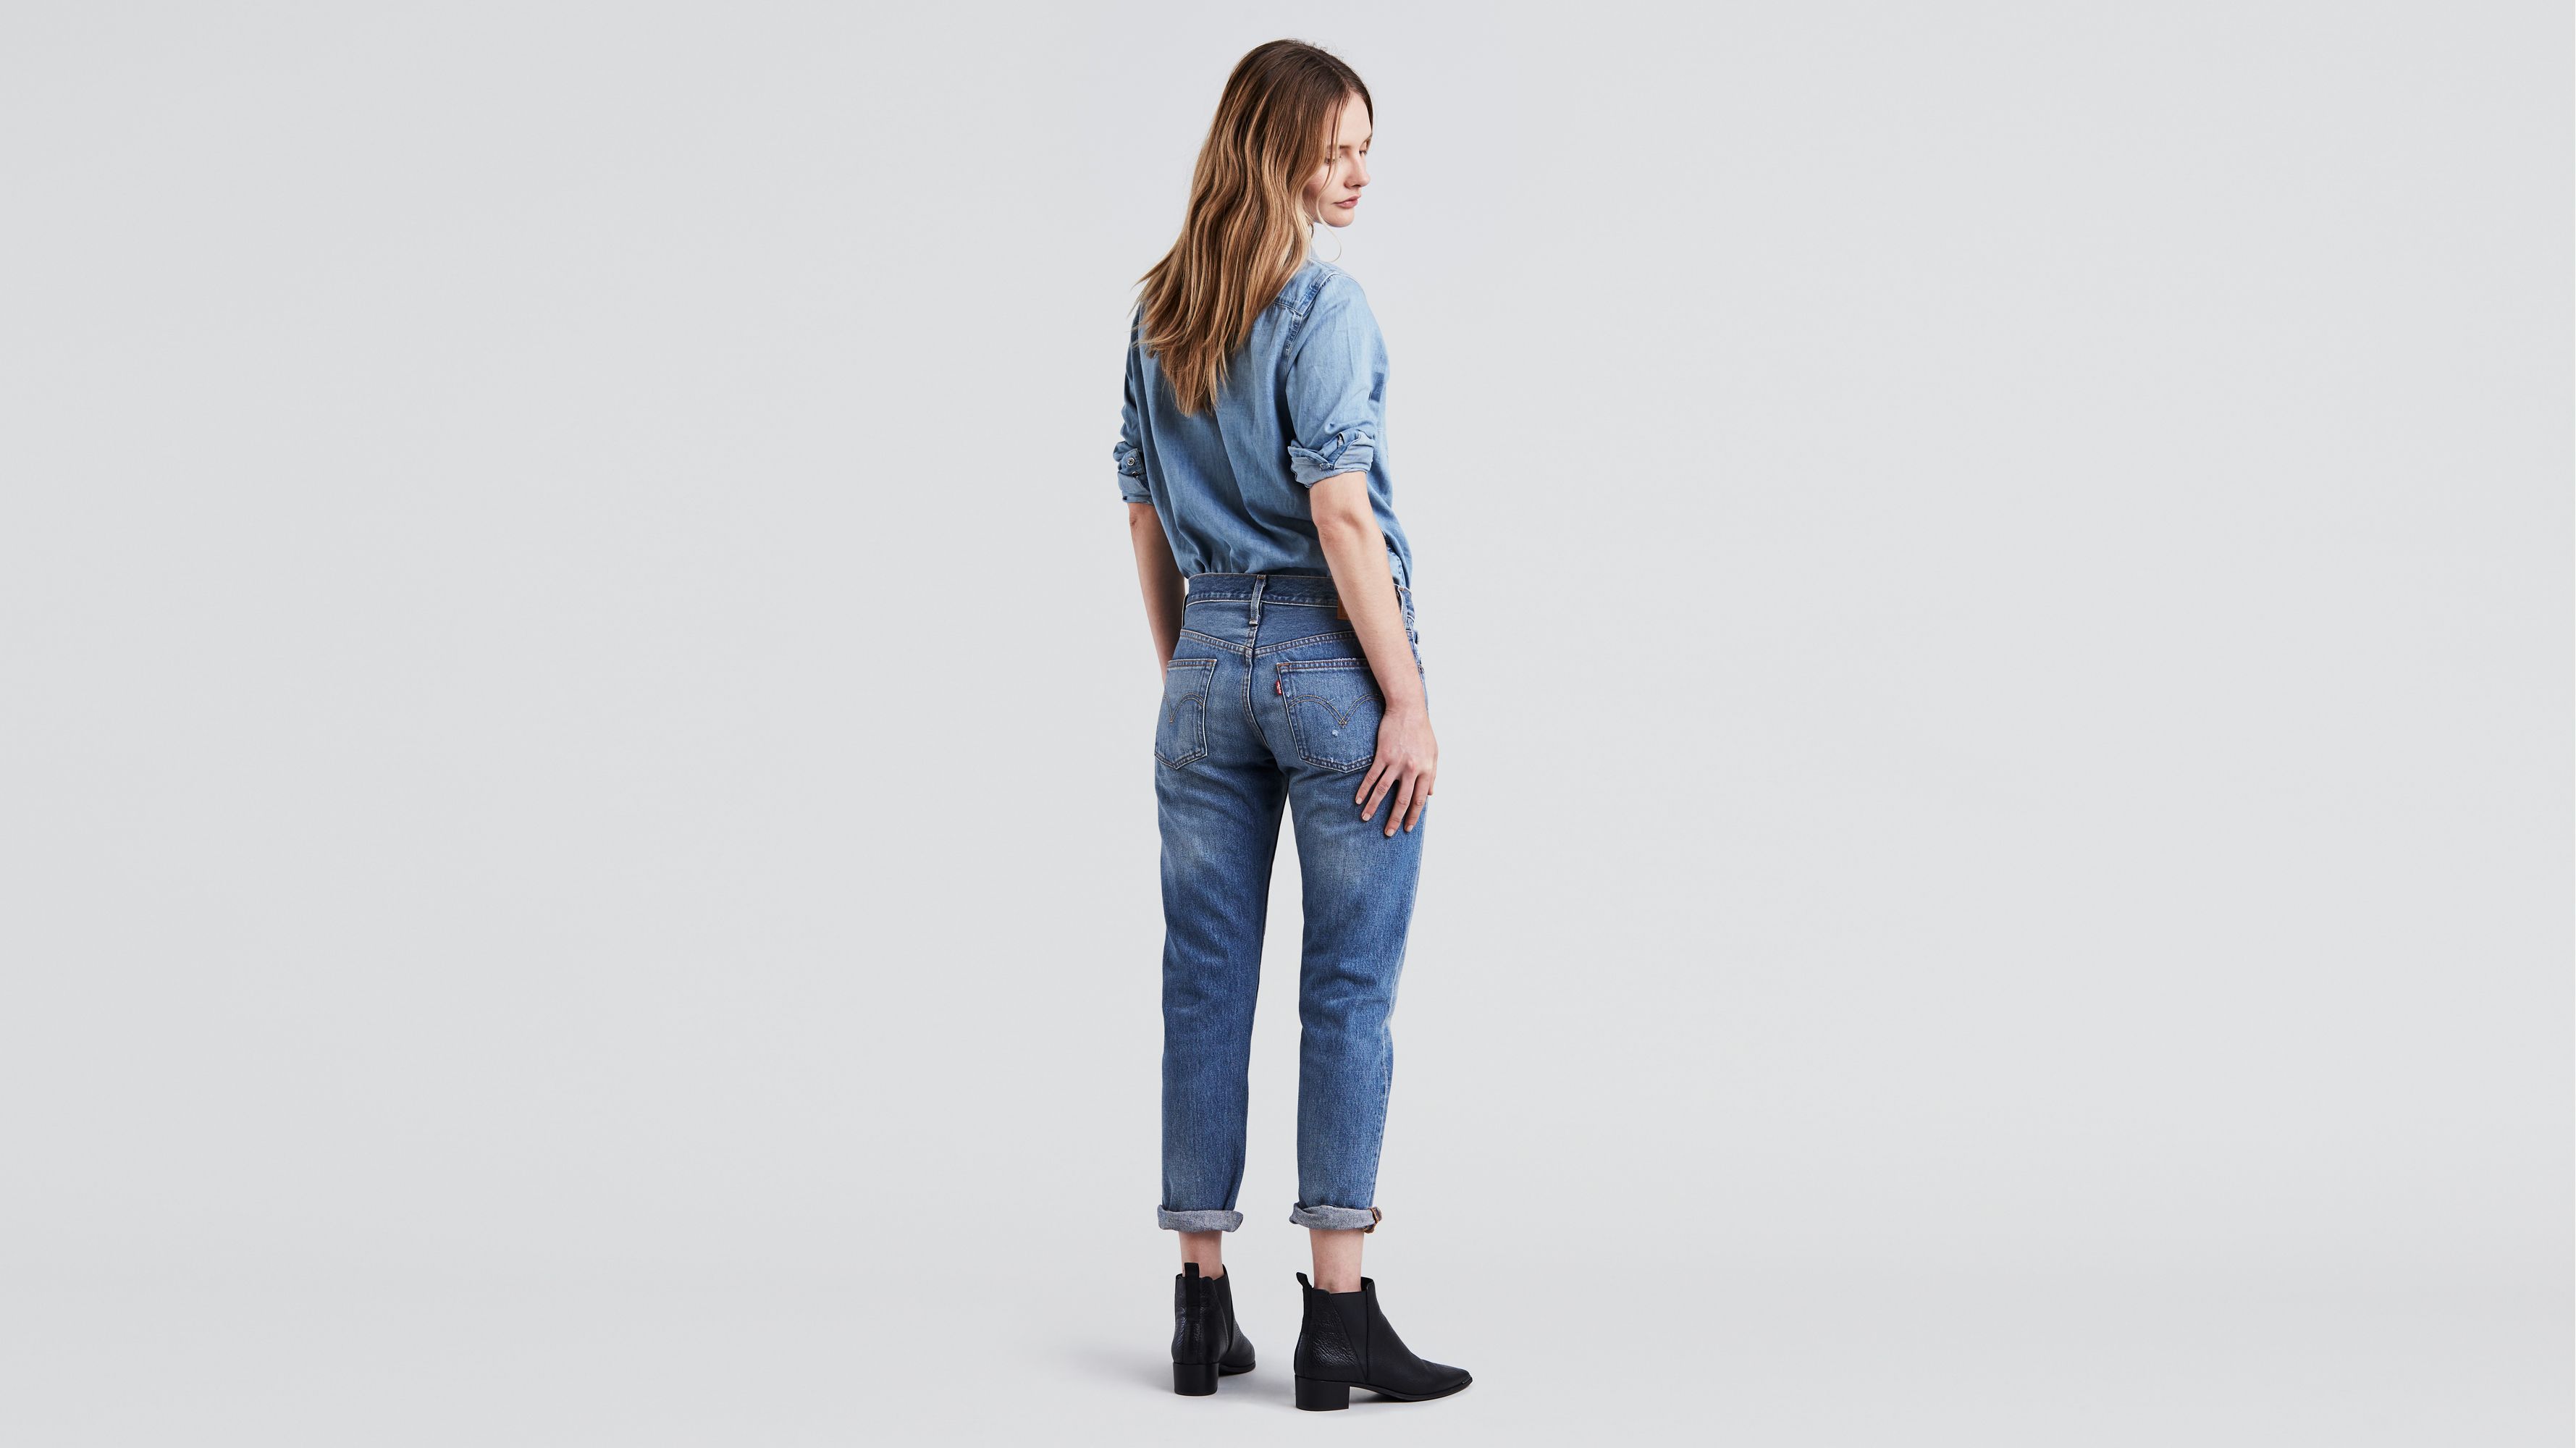 levi's 501 tapered jeans womens